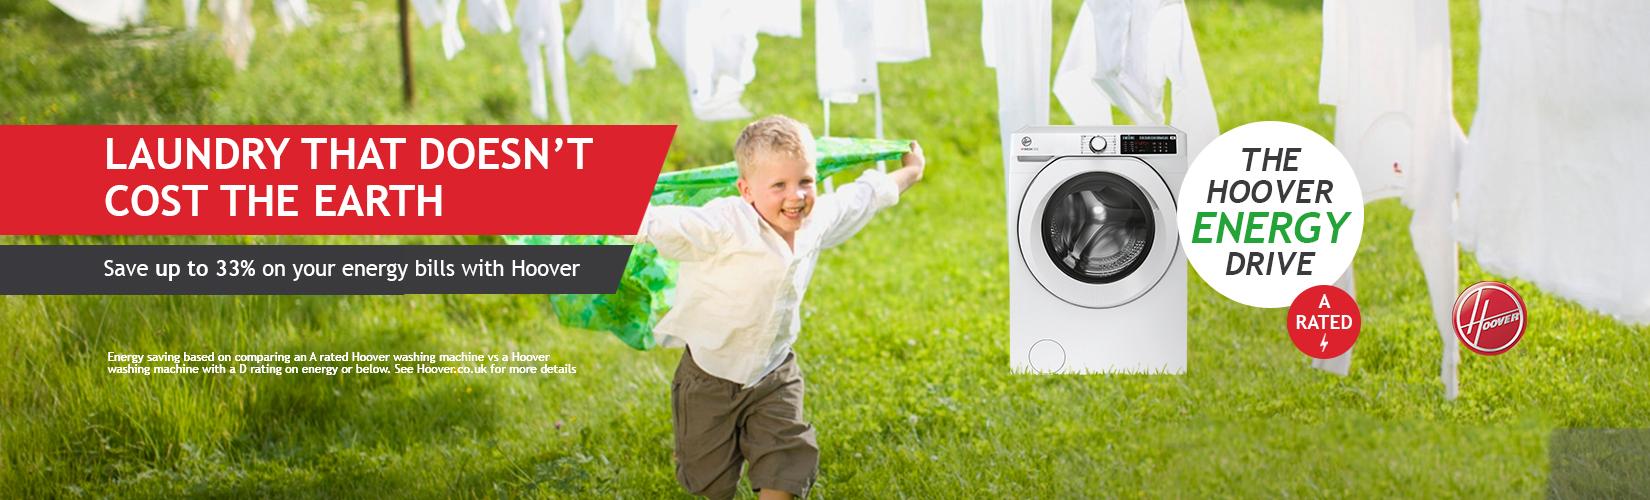 The Hoover energy drive. Laundry that doesn't cost the earth.